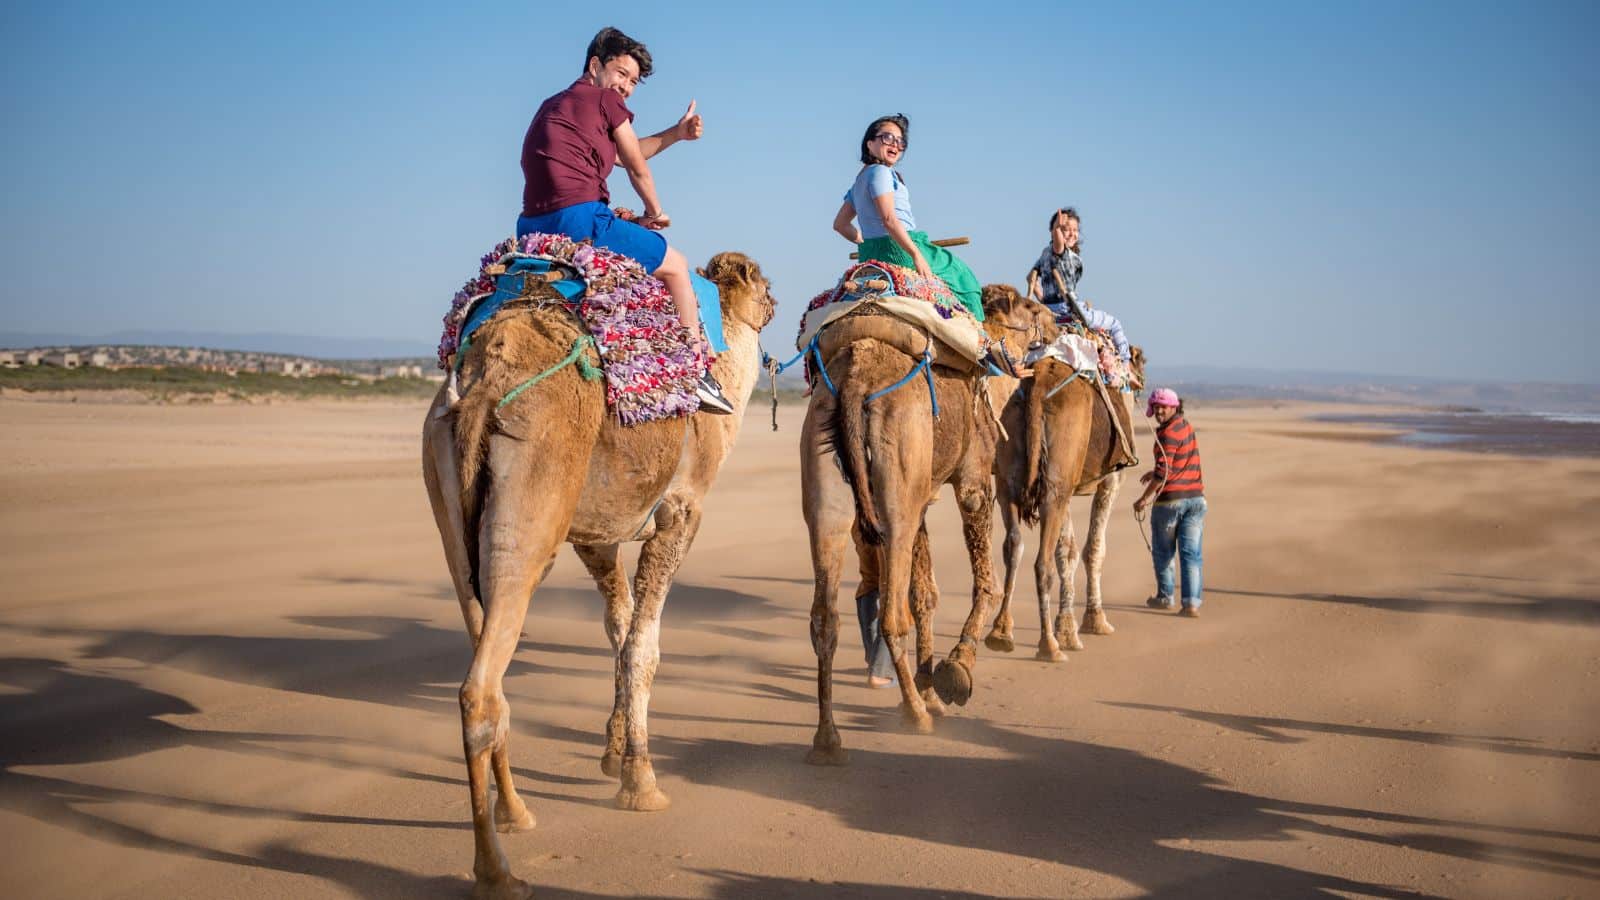 Intrepid Travel family tour in Morocco (Photo: Intrepid Travel)